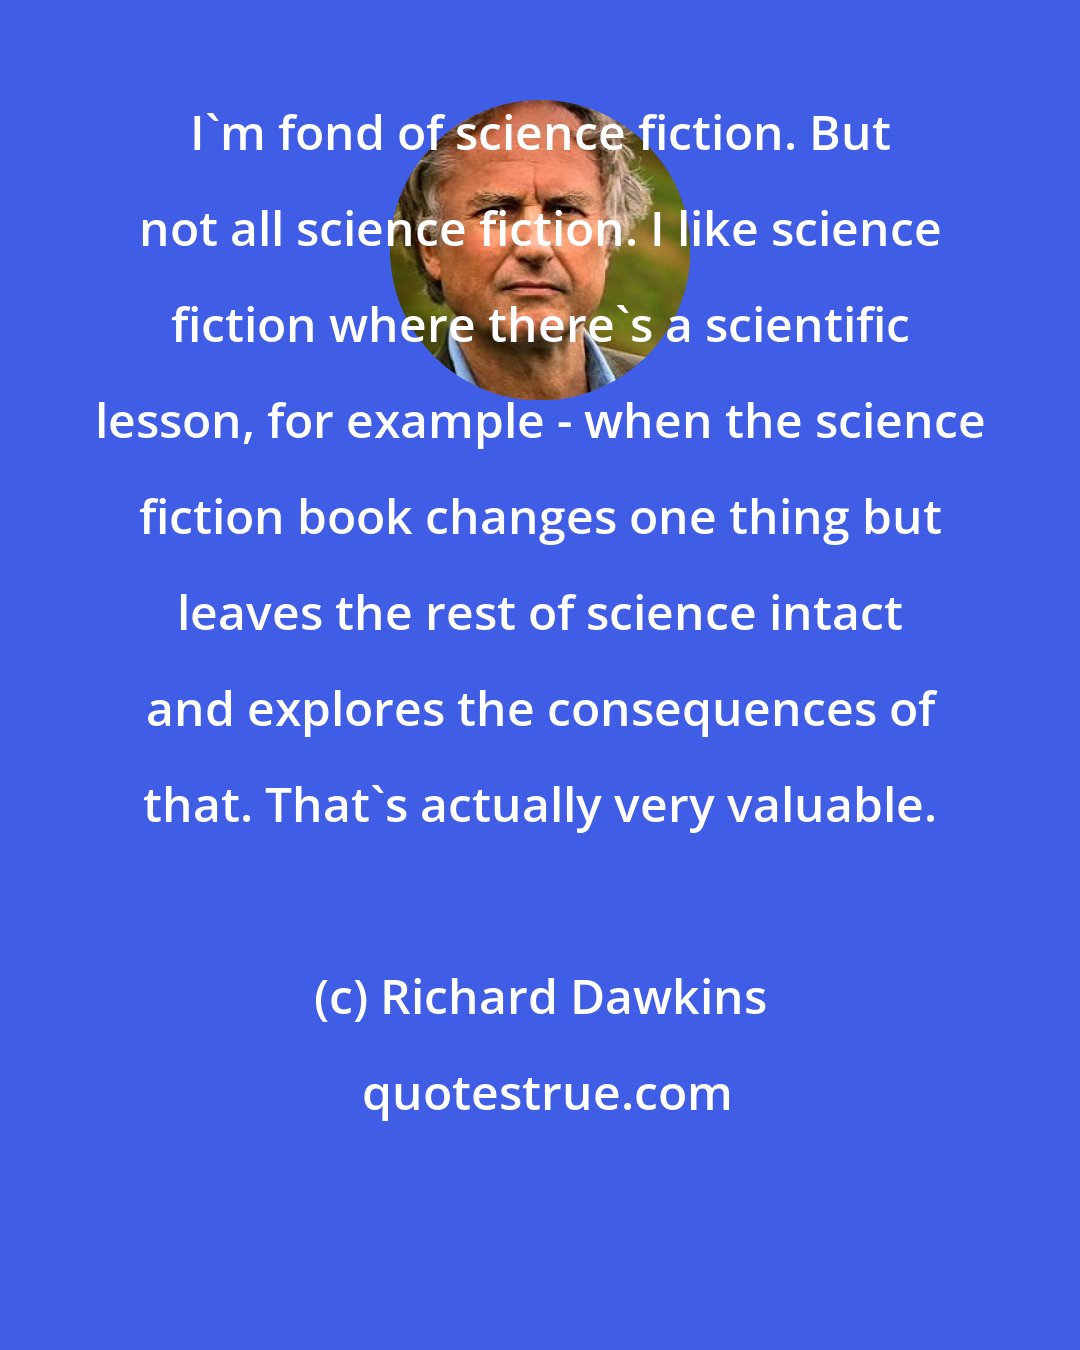 Richard Dawkins: I'm fond of science fiction. But not all science fiction. I like science fiction where there's a scientific lesson, for example - when the science fiction book changes one thing but leaves the rest of science intact and explores the consequences of that. That's actually very valuable.